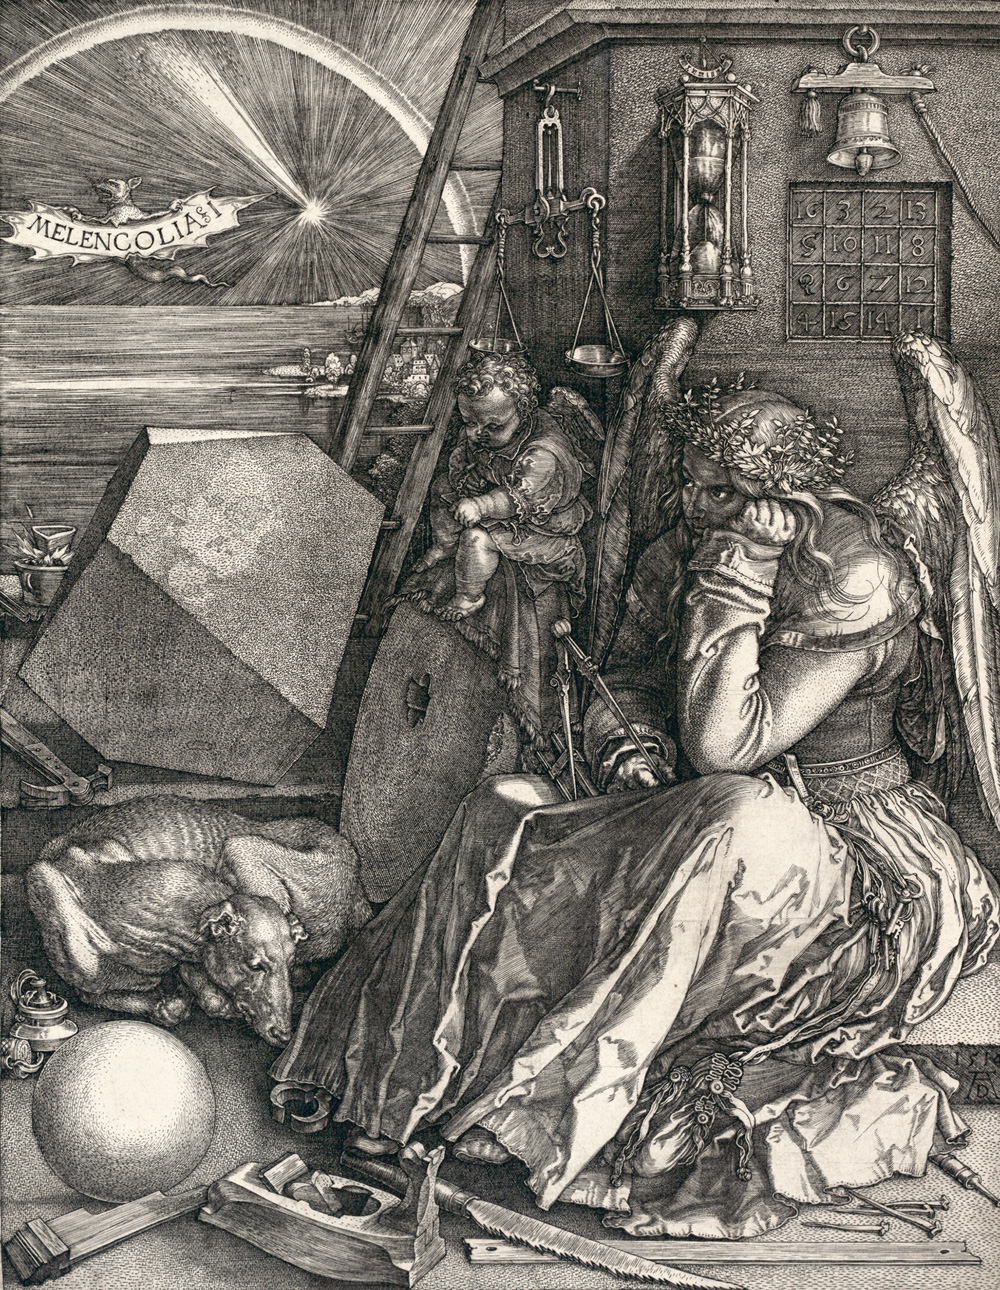 Albrecht Dürer: Master Drawings, Watercolors, And Prints From The Albertina